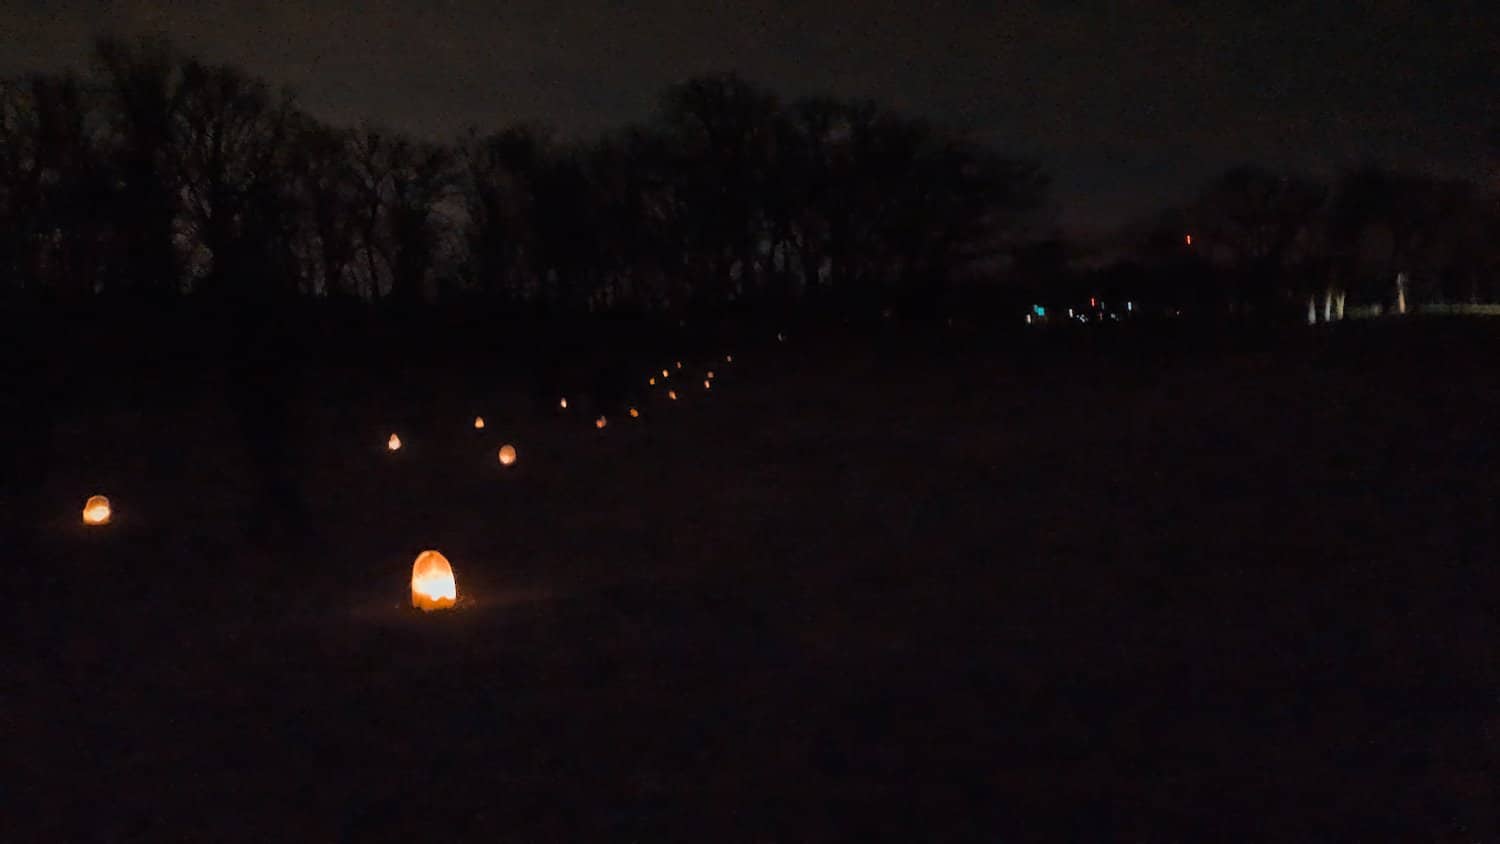 Luminarias lighting the path across the grass, back to the pond.